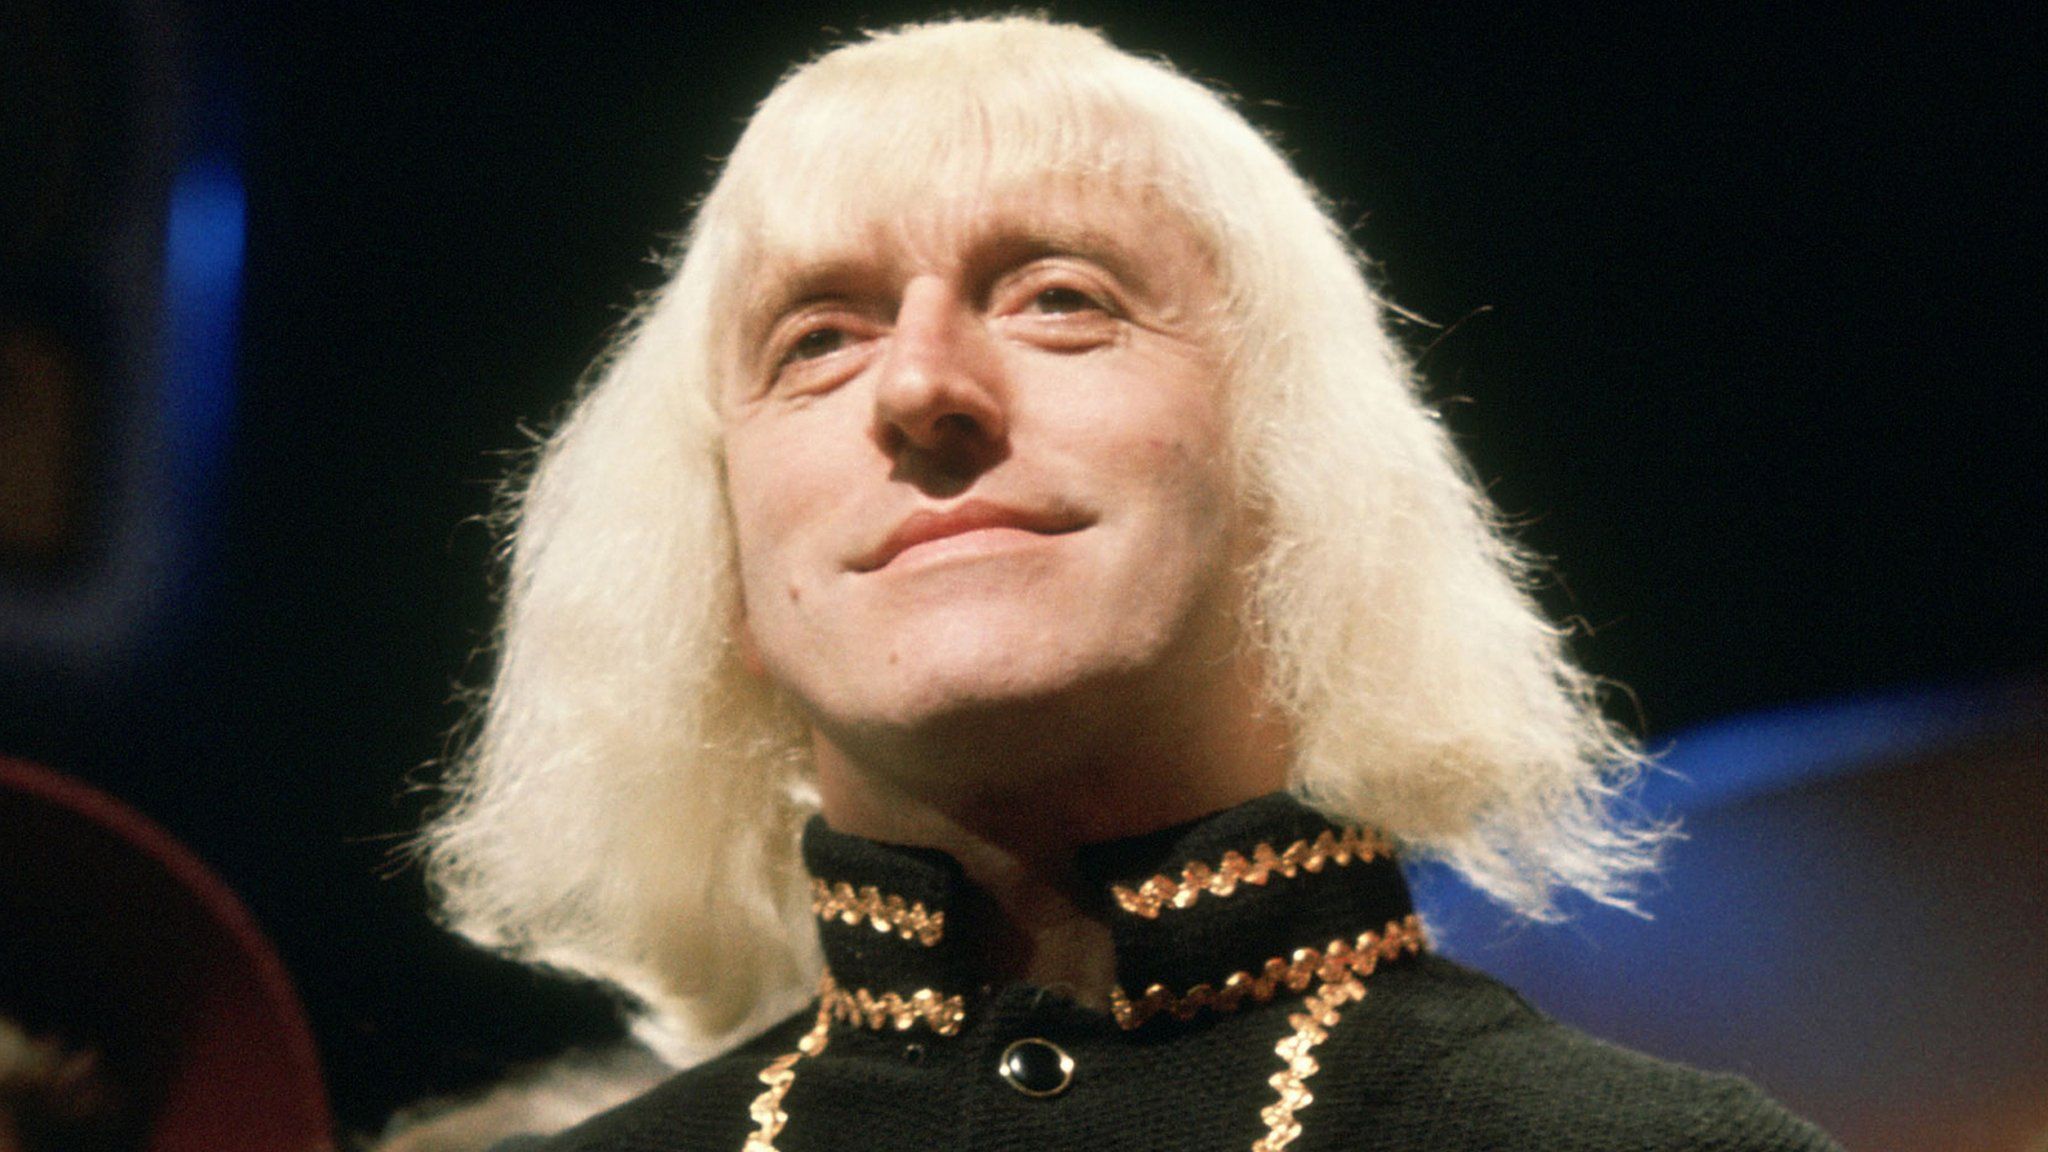 Jimmy Savile presenting Top of the Pops in 1973